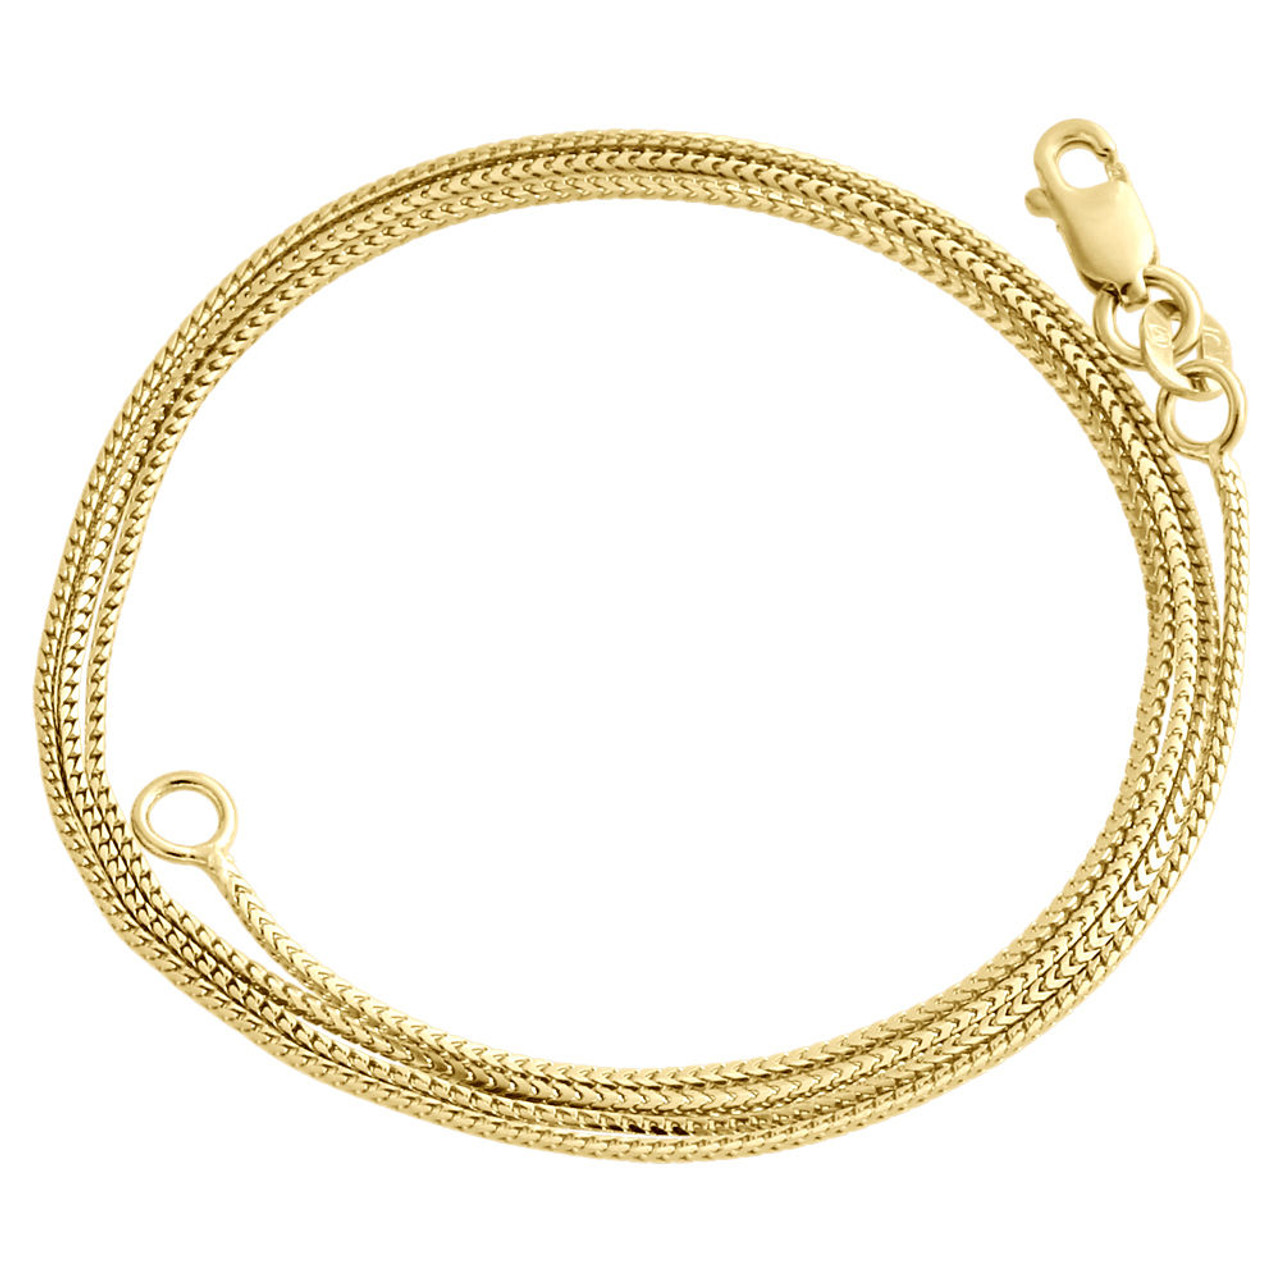 10K Yellow Gold Solid Franco Box Chain Closed Link 0.75 mm Necklace 16 - 24 Inches